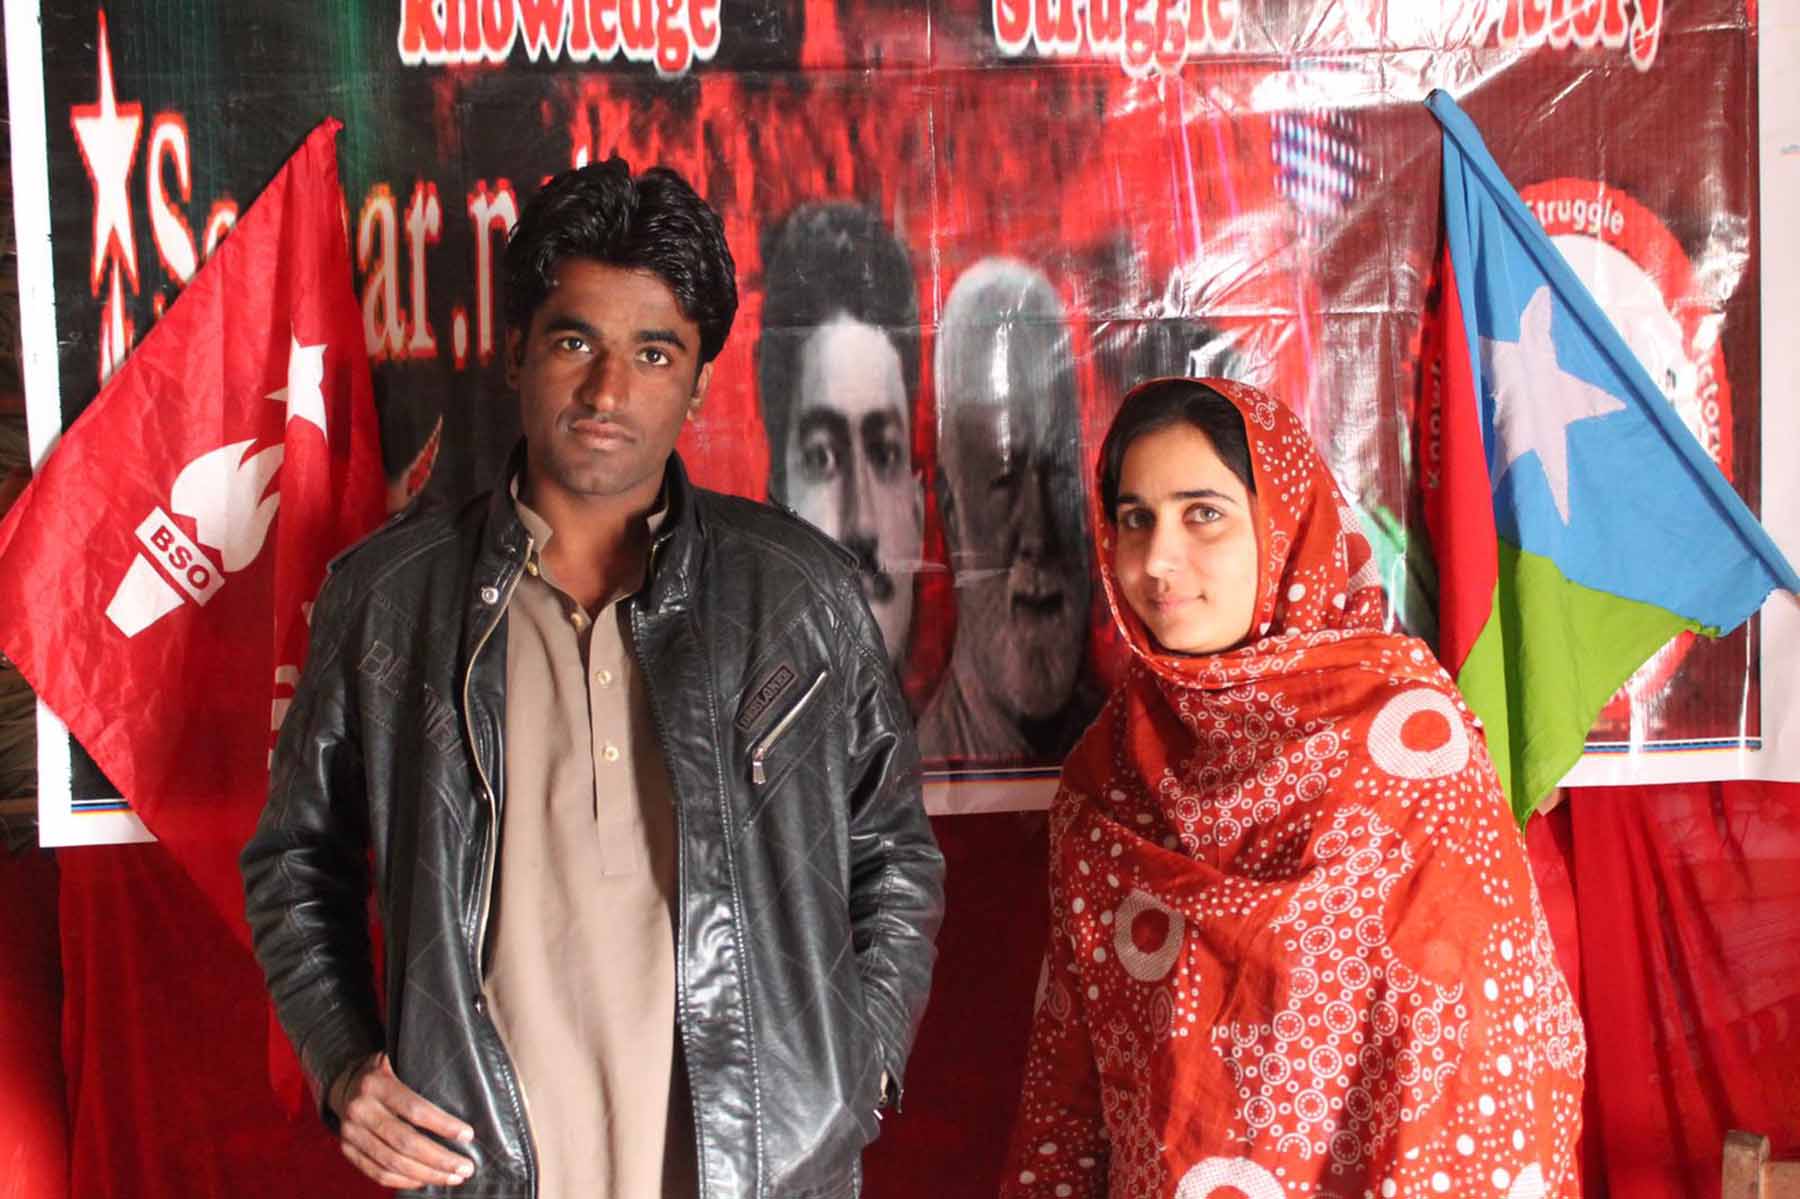 Lateef Johar, dressed in a leather jacket, and Karima Mehrab, dressed in red, stand in front of a red and black protest sign and blue, green and red Balochistan flag